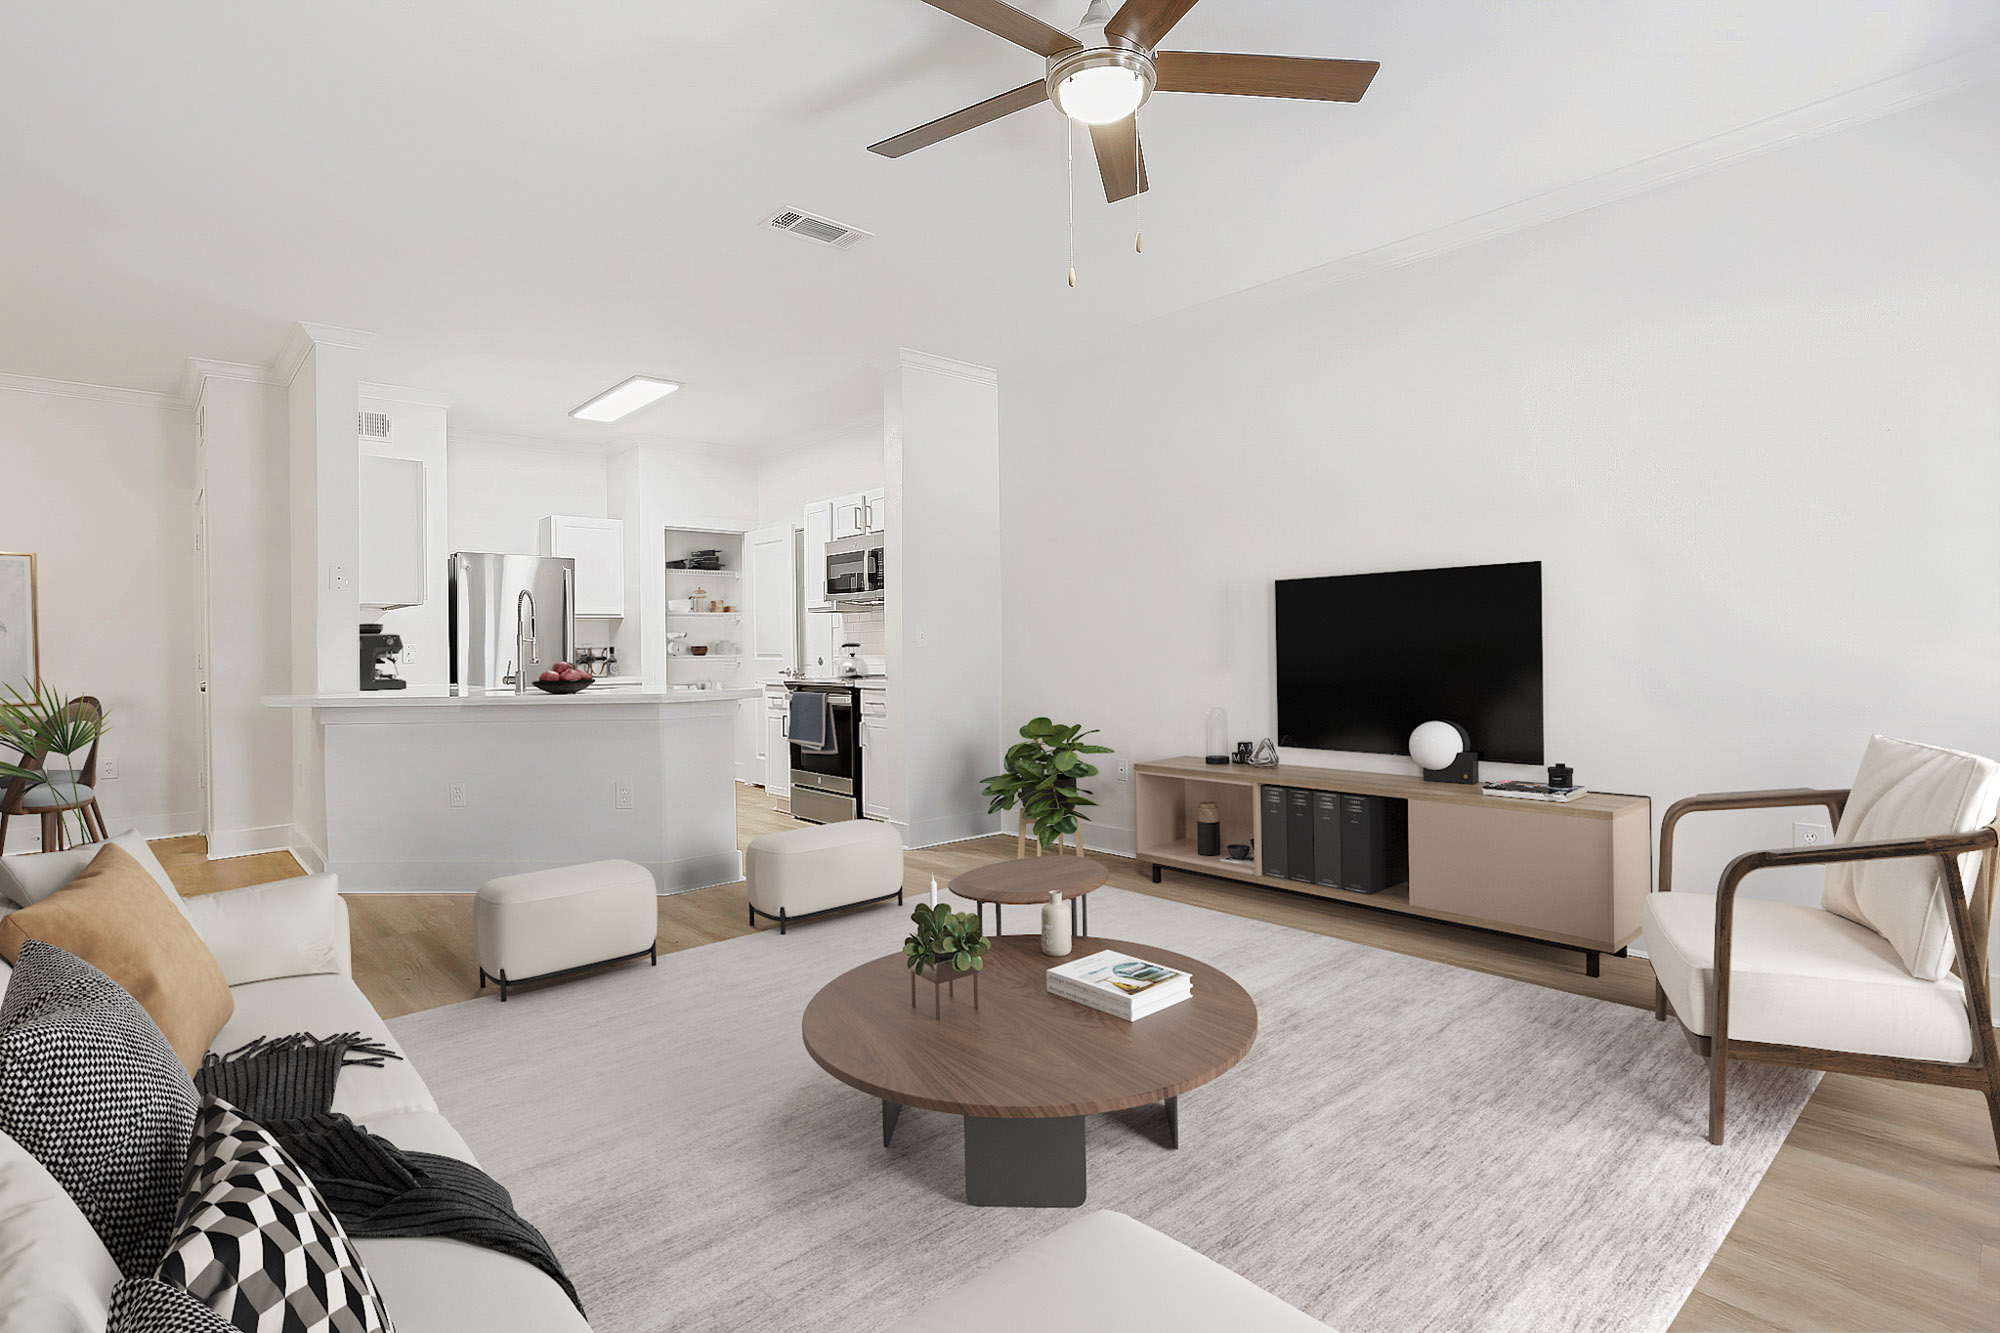 A living space at The Villas at Shadow Creek apartments in Houston, TX.